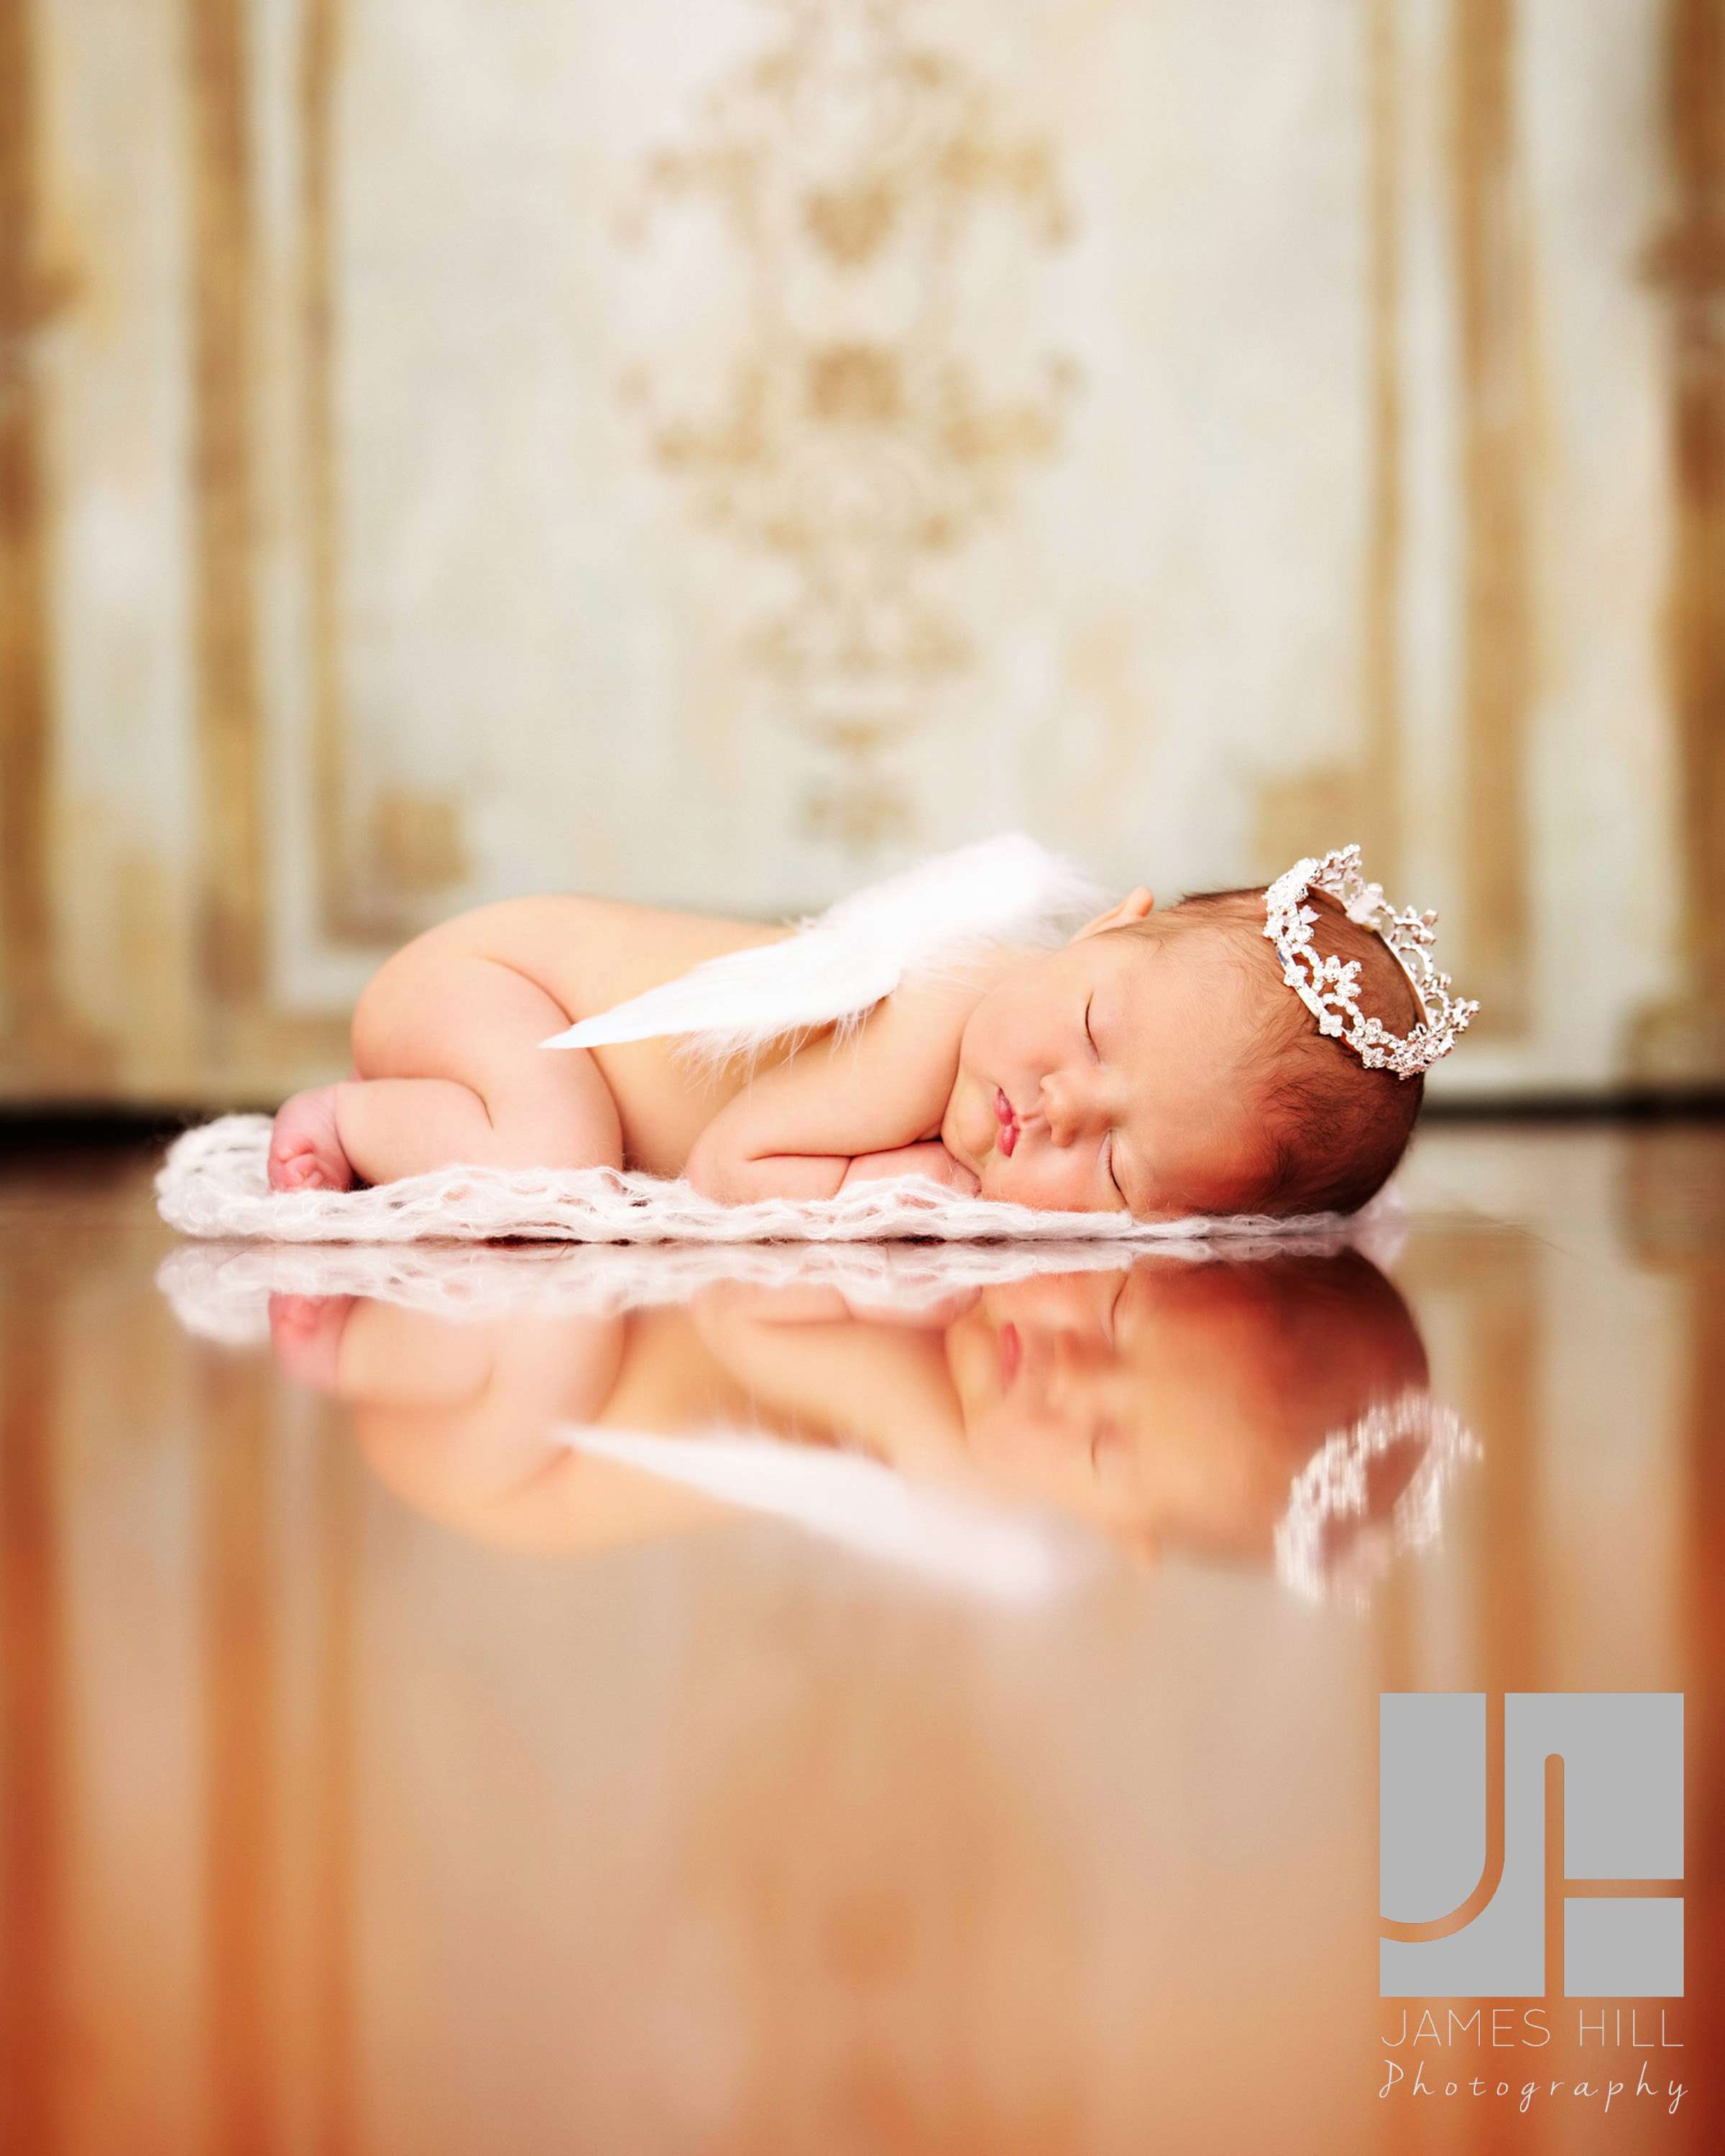 Blakely at her newborn portrait session. 